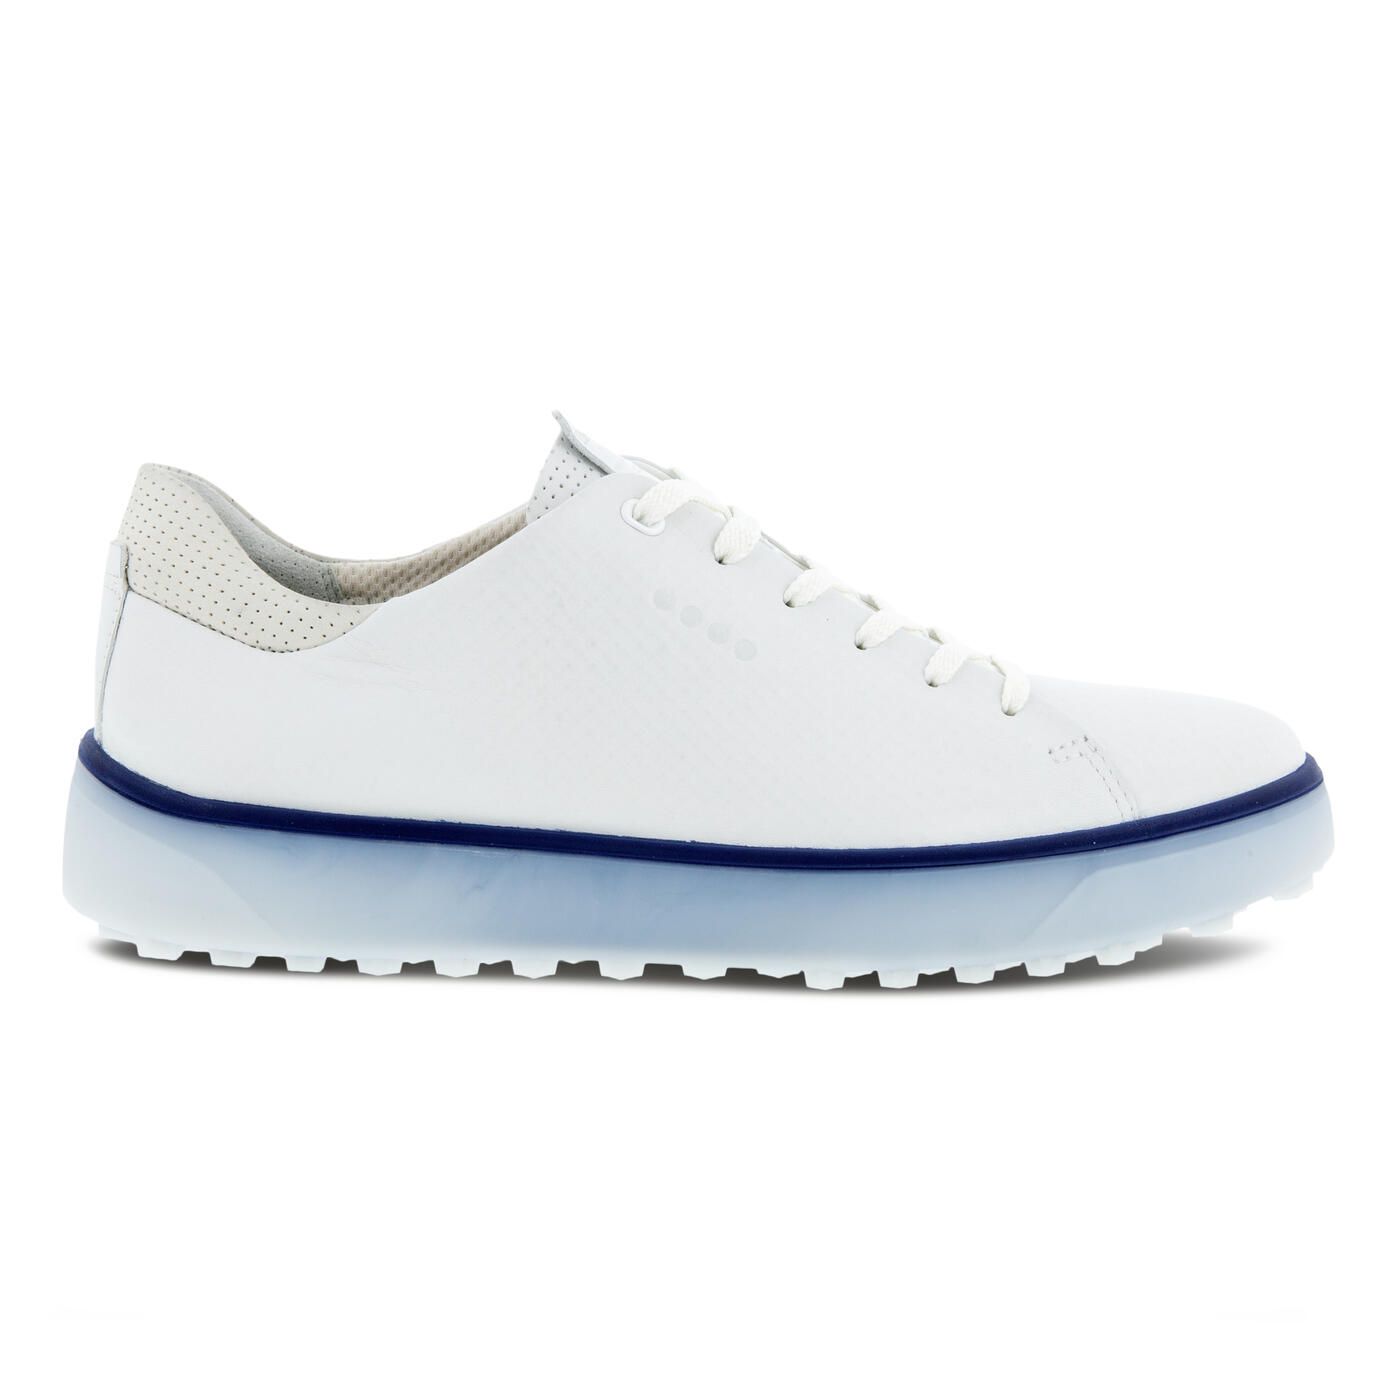 UPC 194890591332 product image for ECCO Men's Golf Tray Shoe Size 9 Leather White | upcitemdb.com